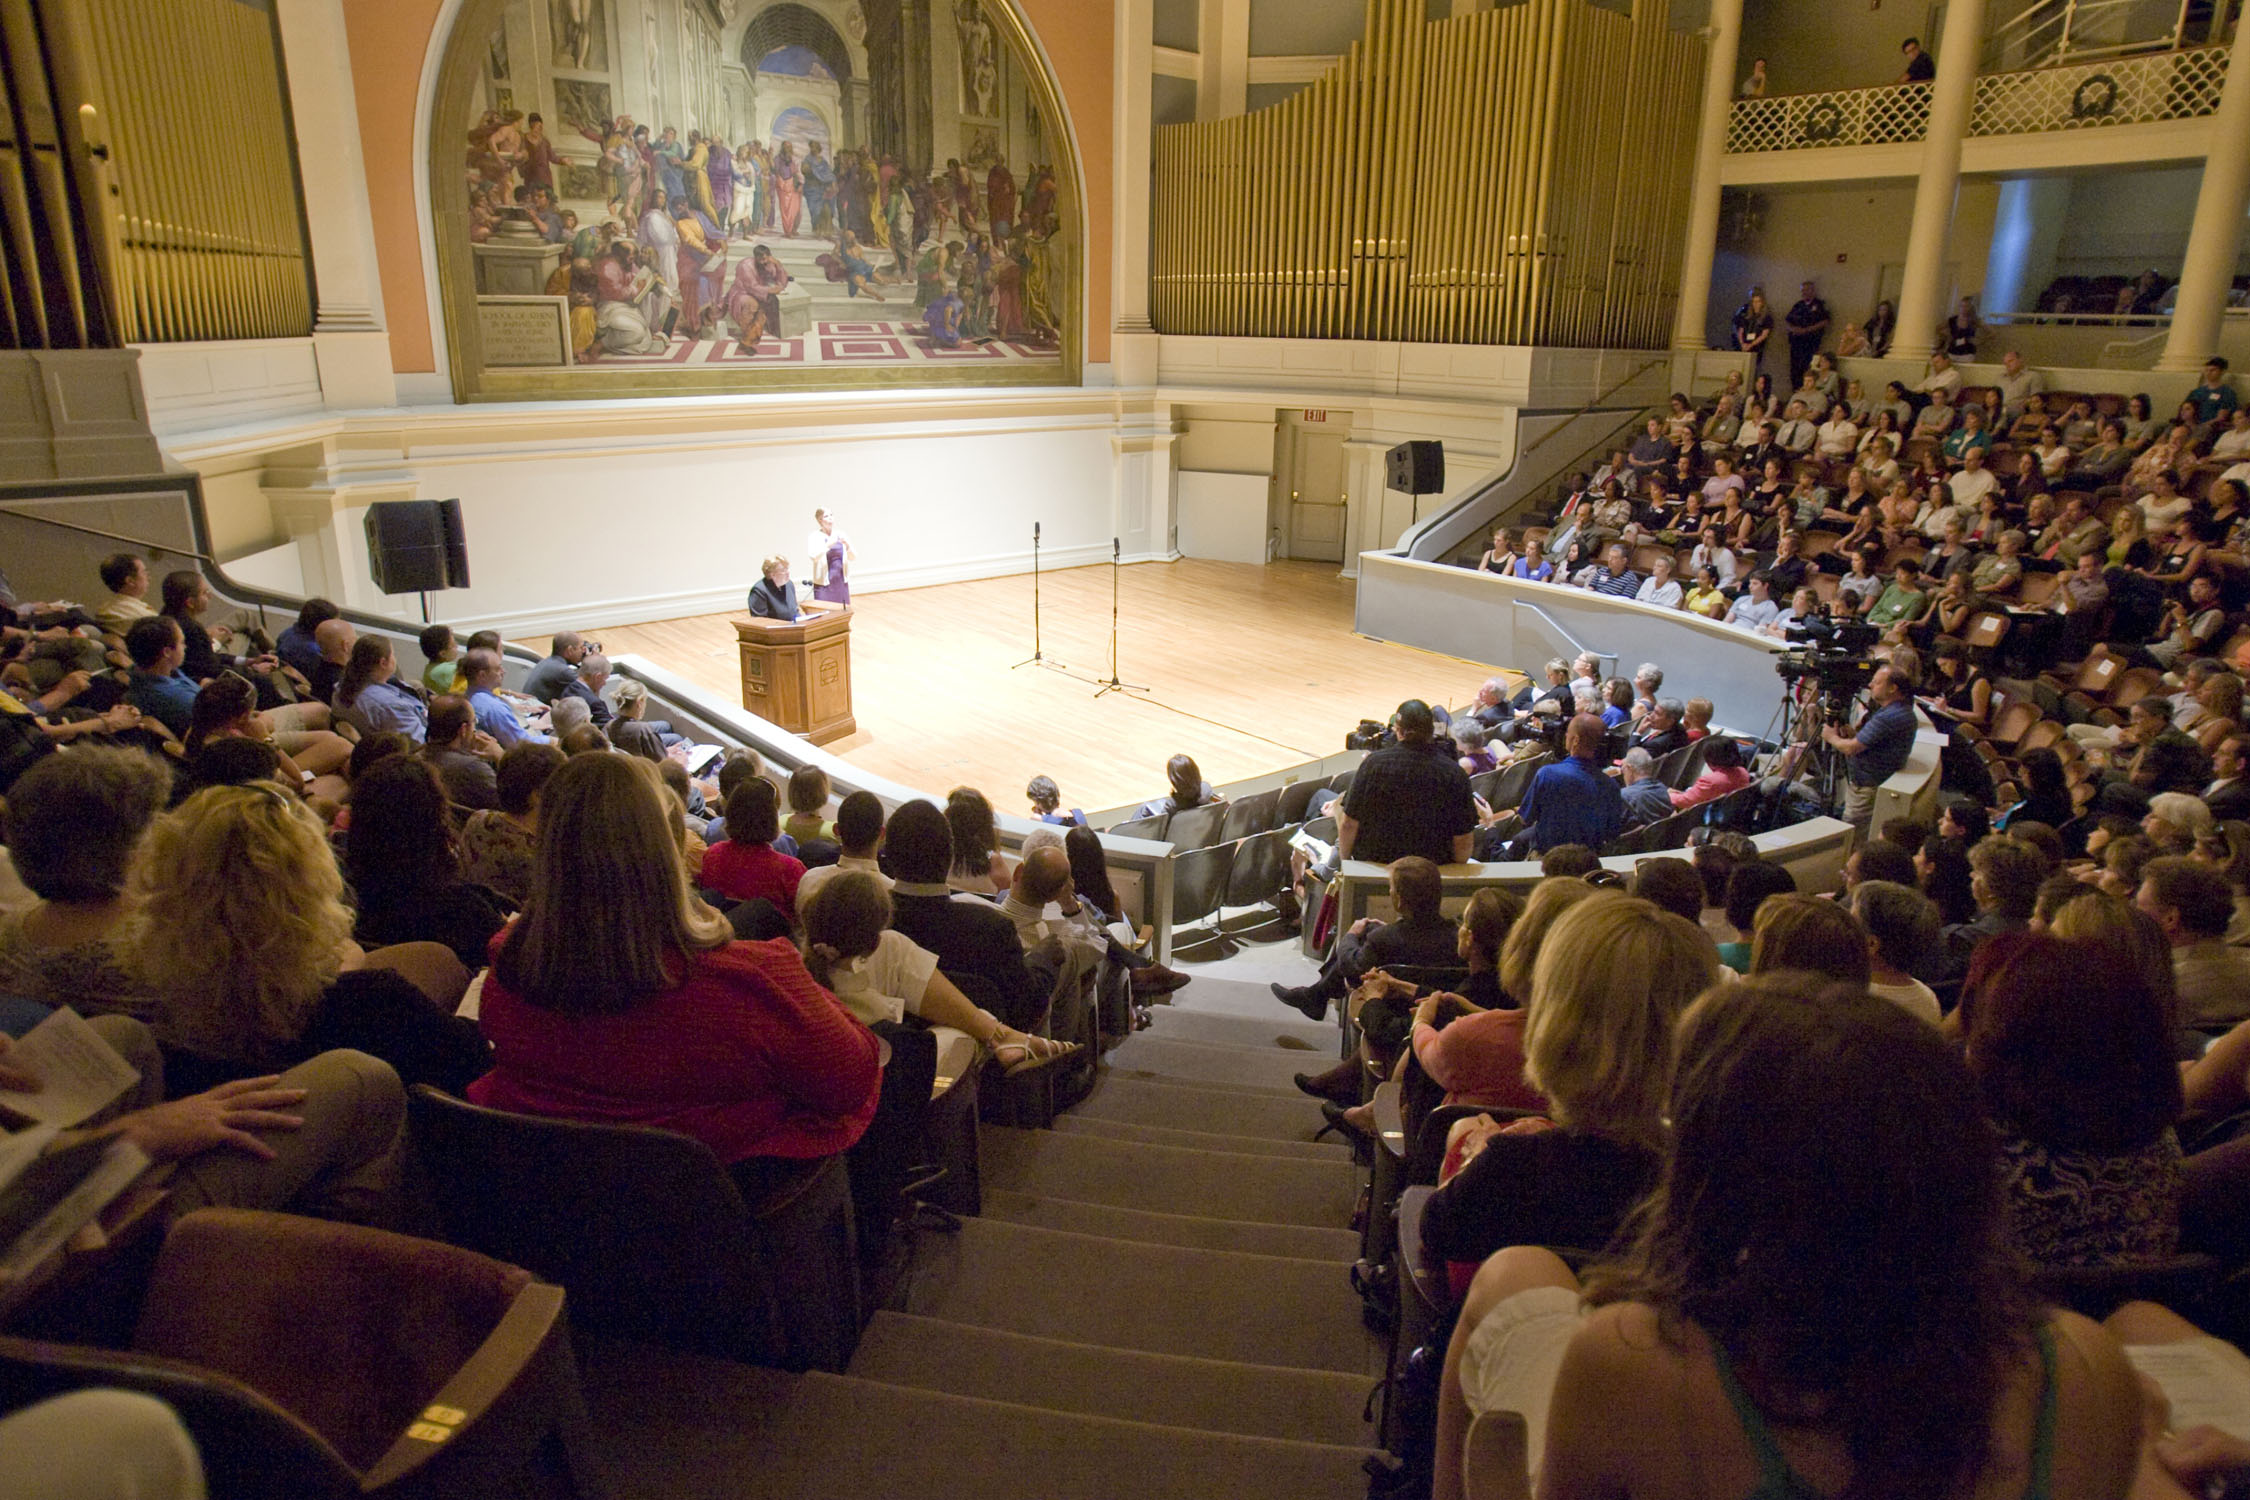 President Sullivan stands at a podium giving a speech to an auditorium full of people